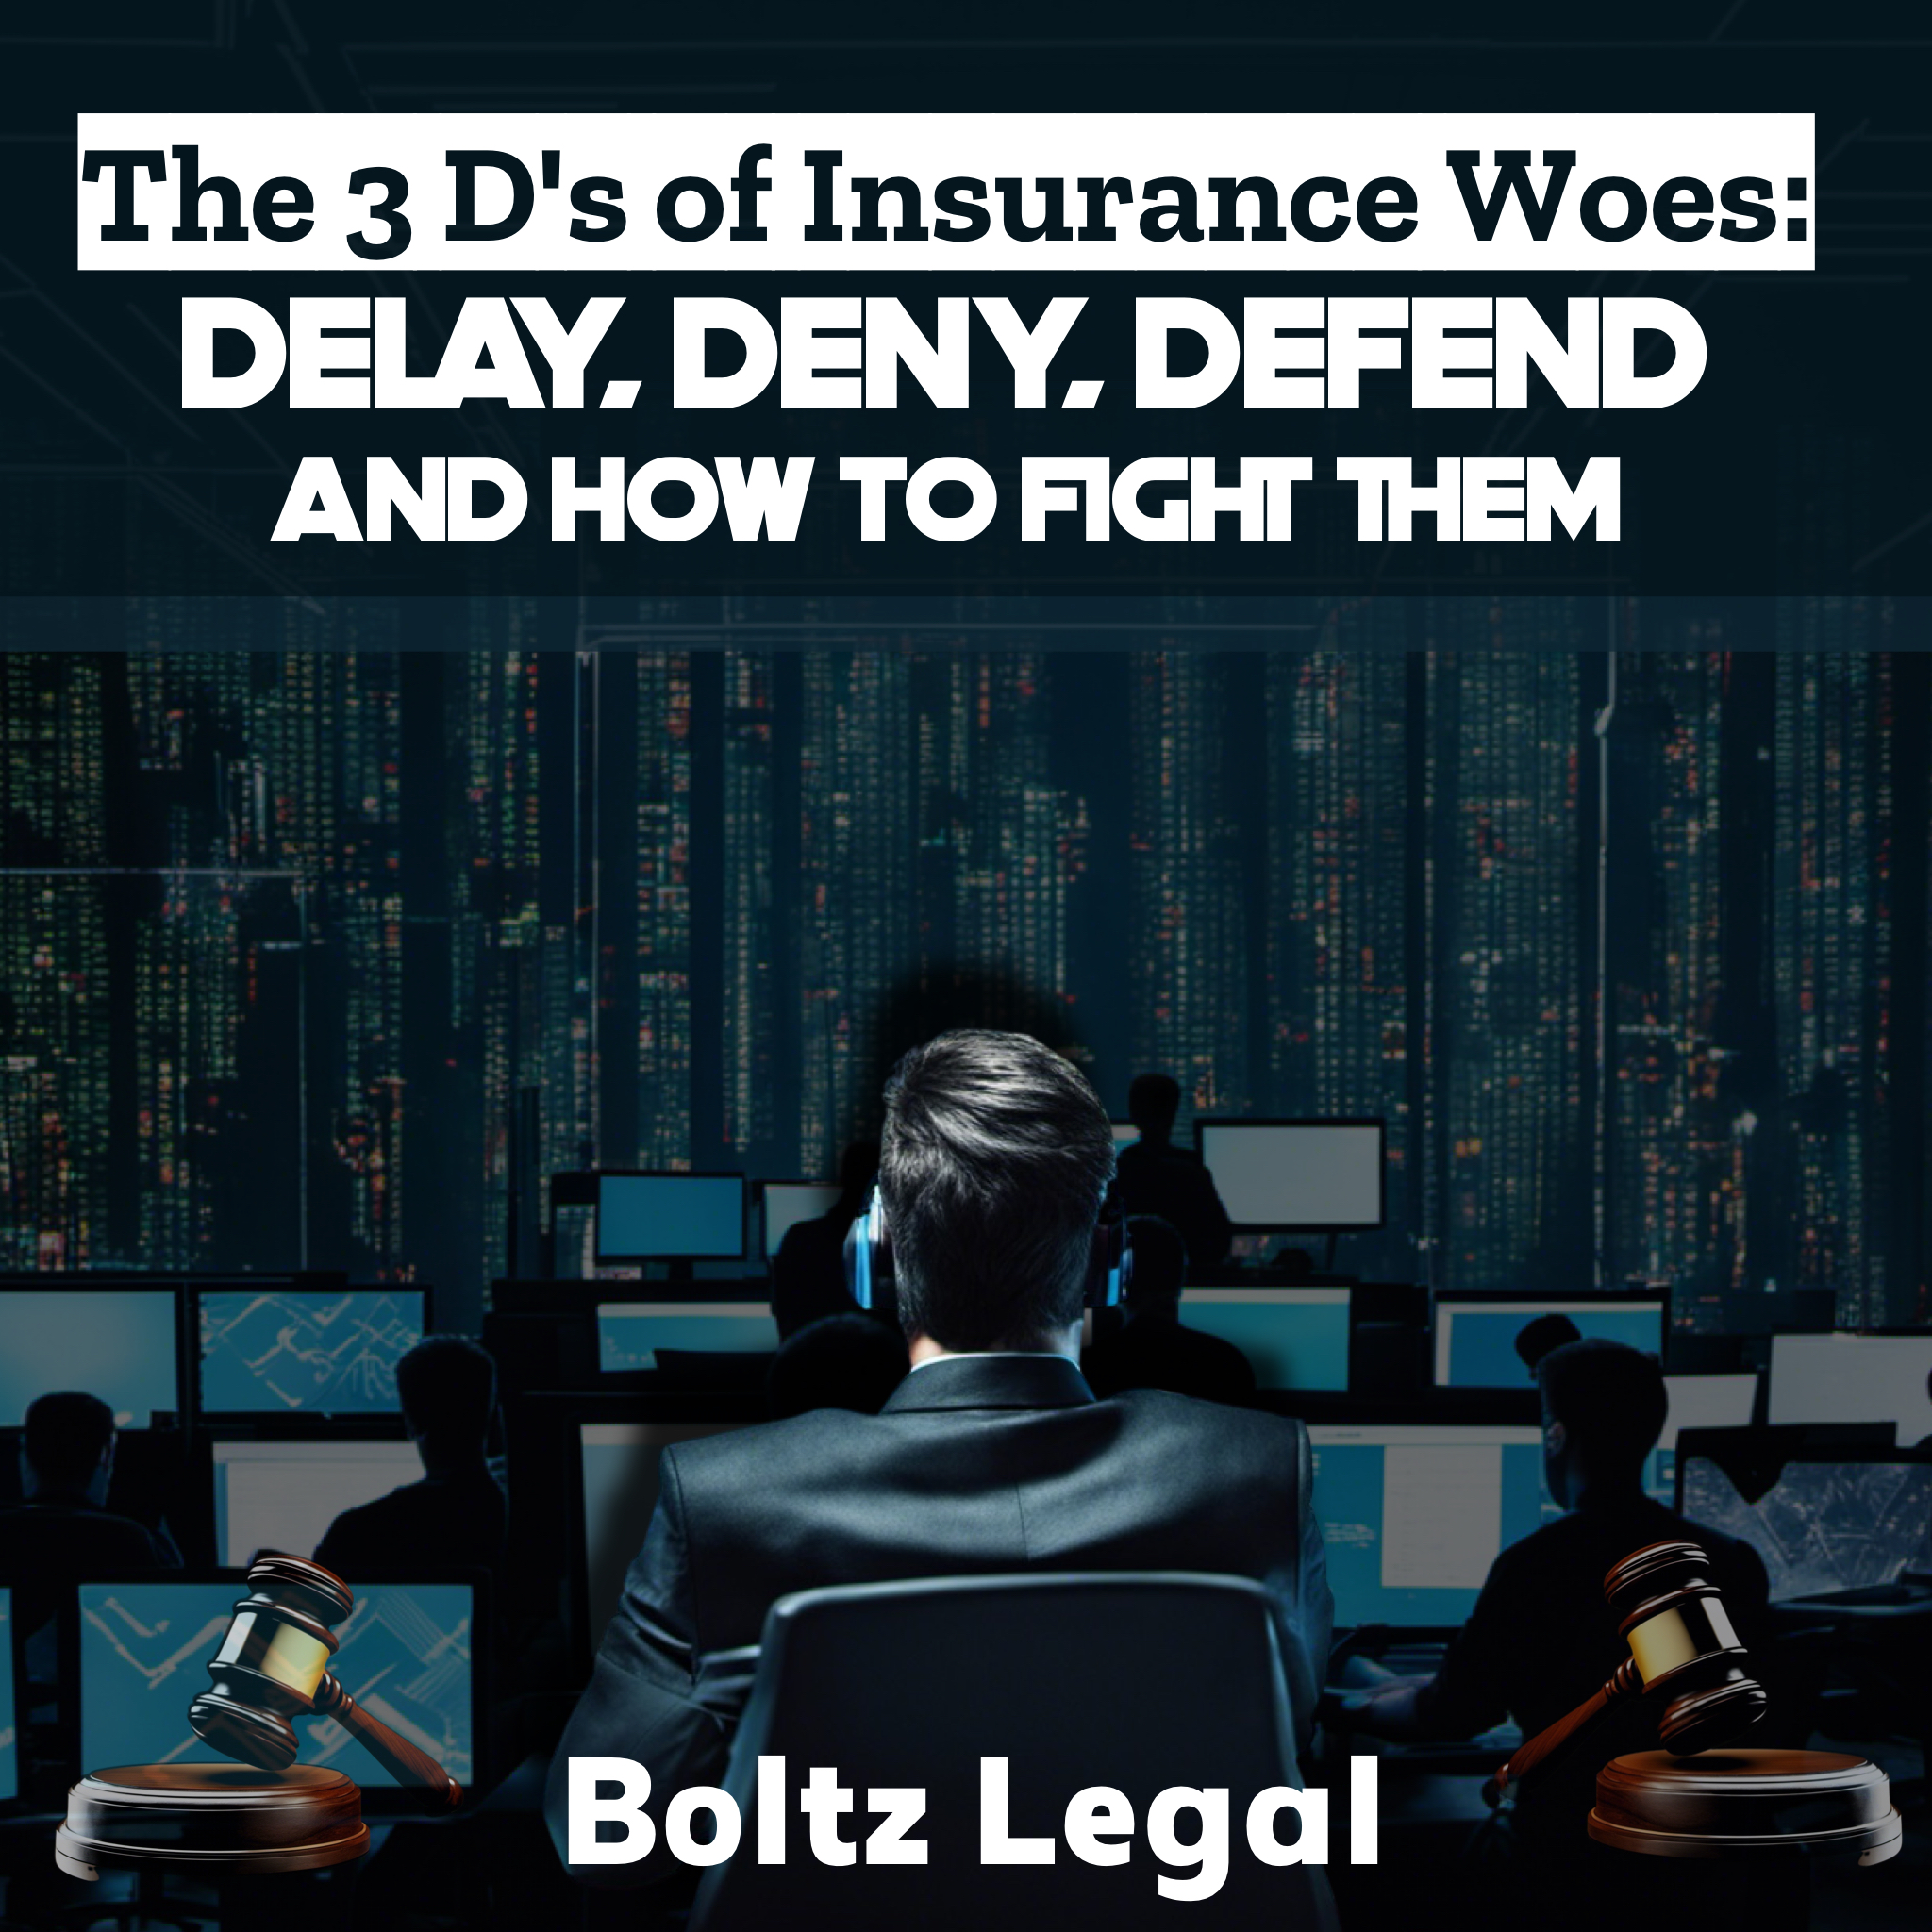 The 3 D's of Insurance Woes: Delay, Deny, Defend and How to Fight Them